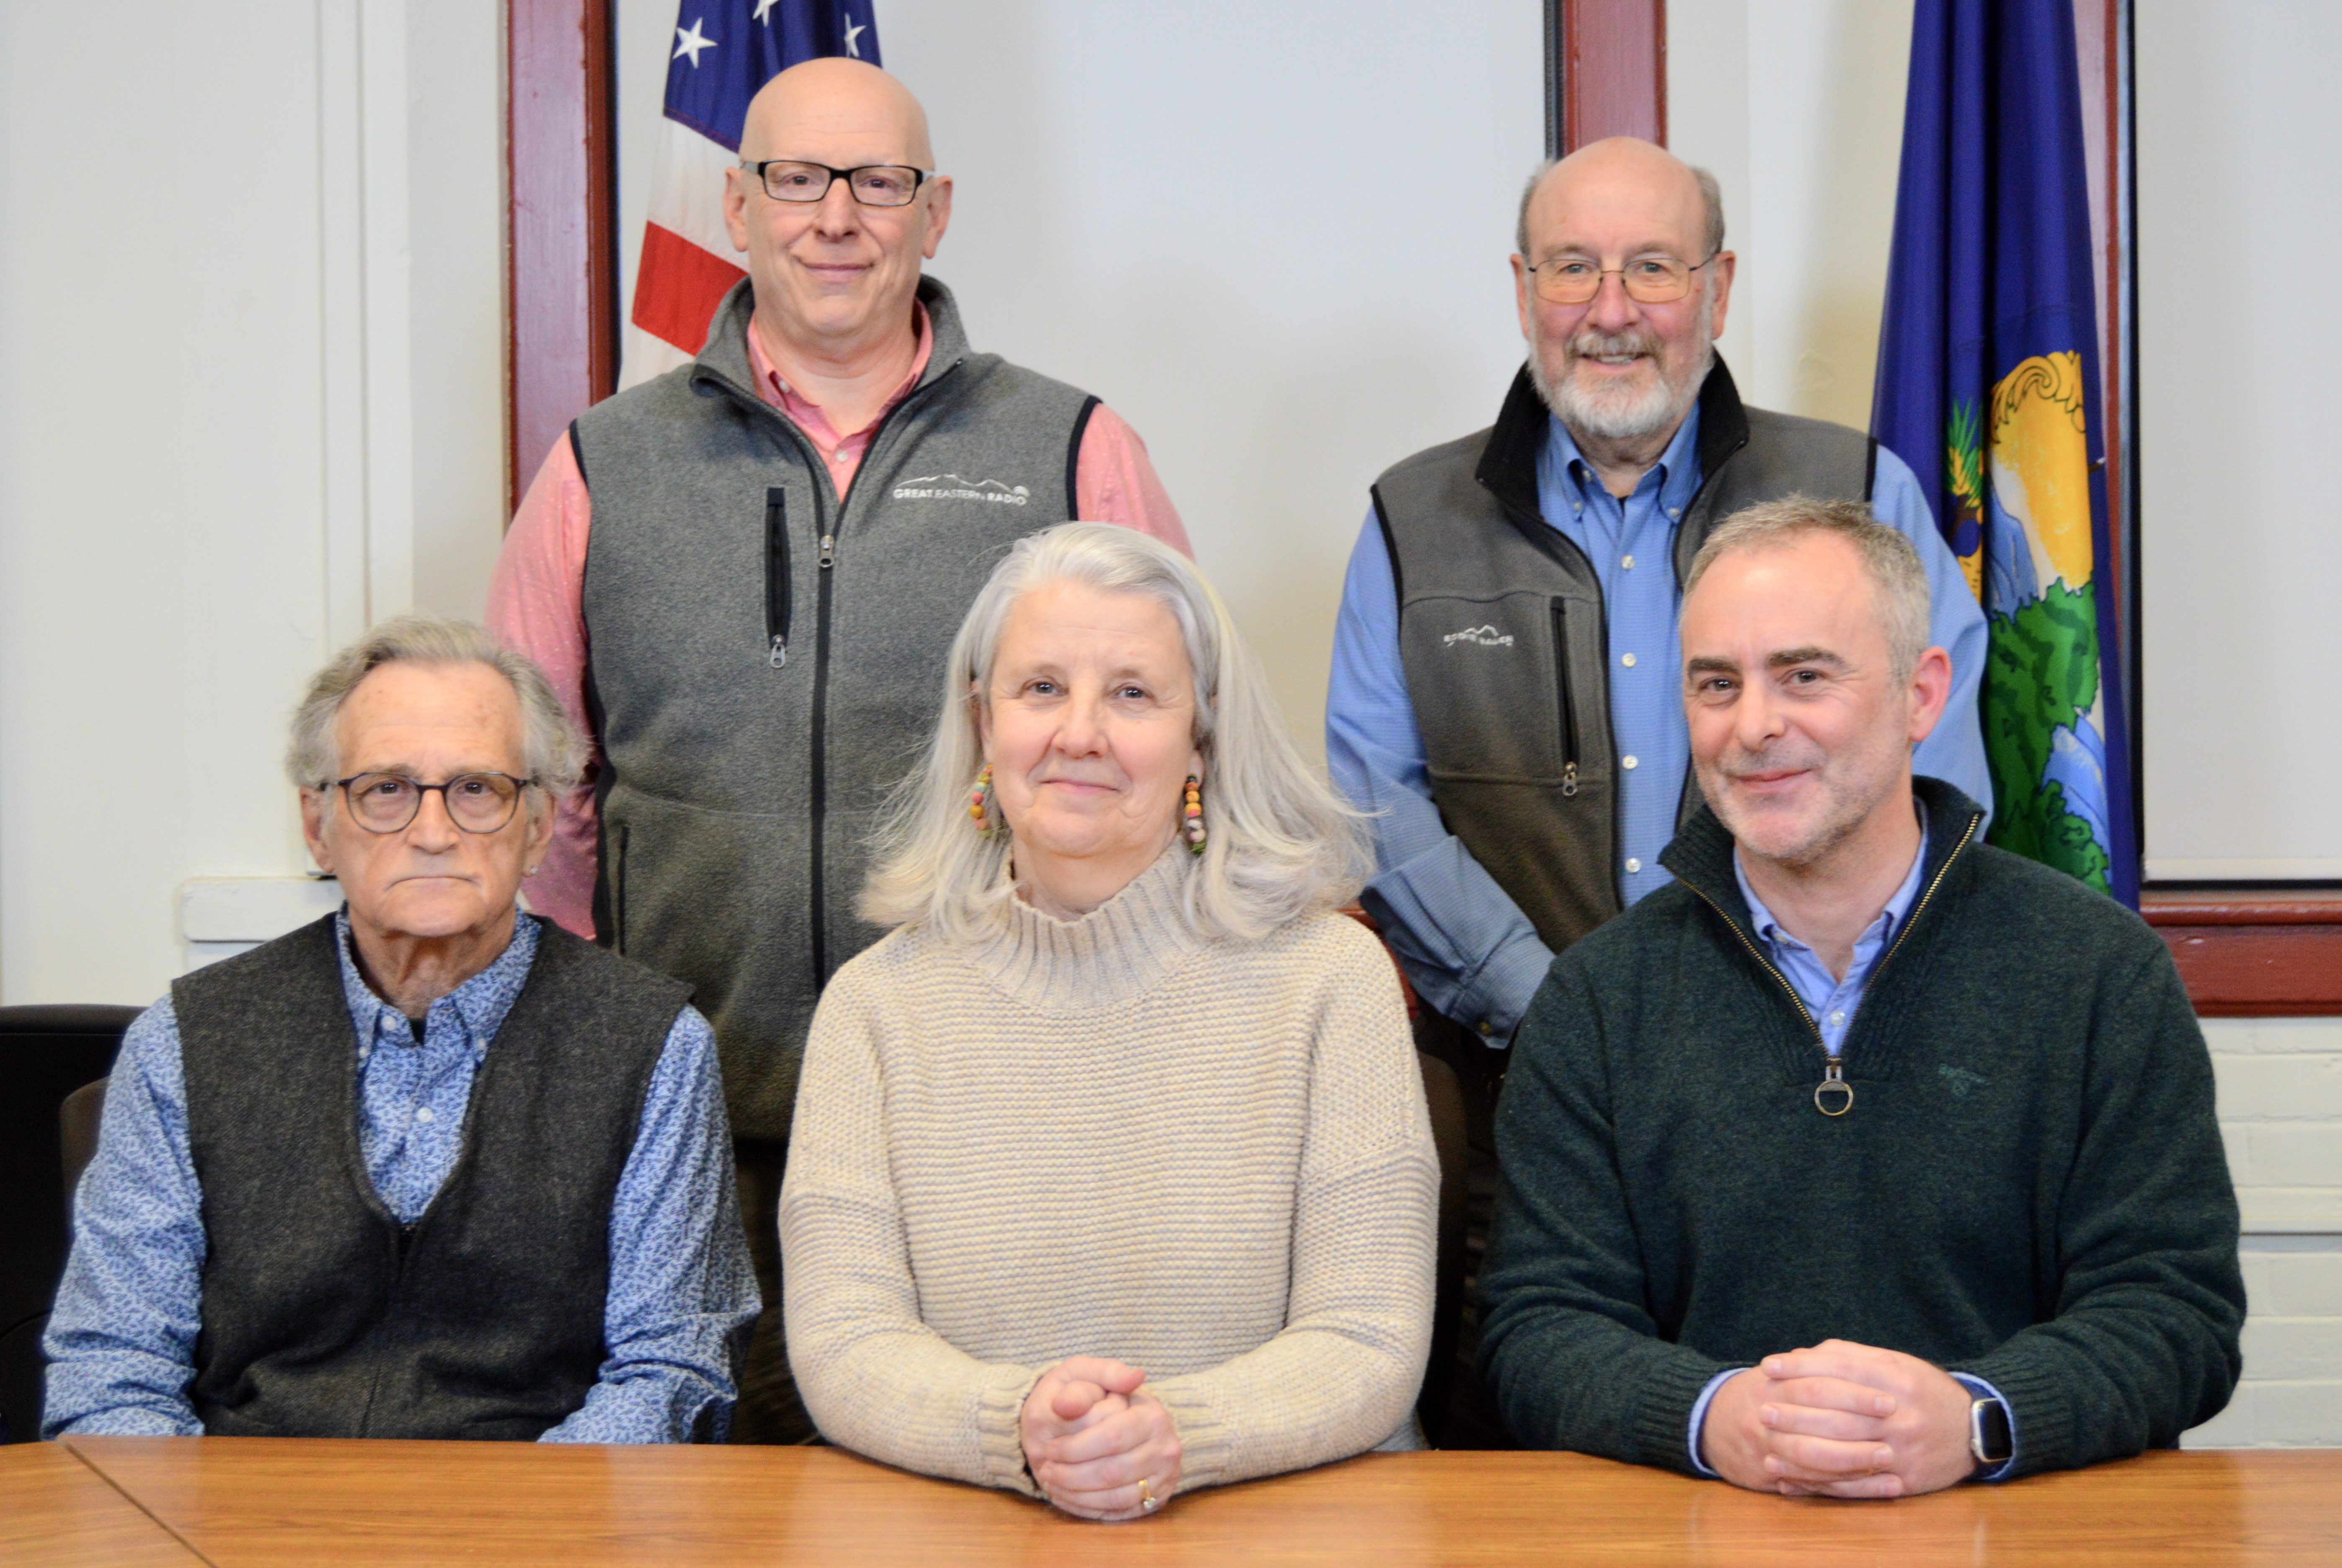 A photo of the five members of the Brattleboro Selectboard.